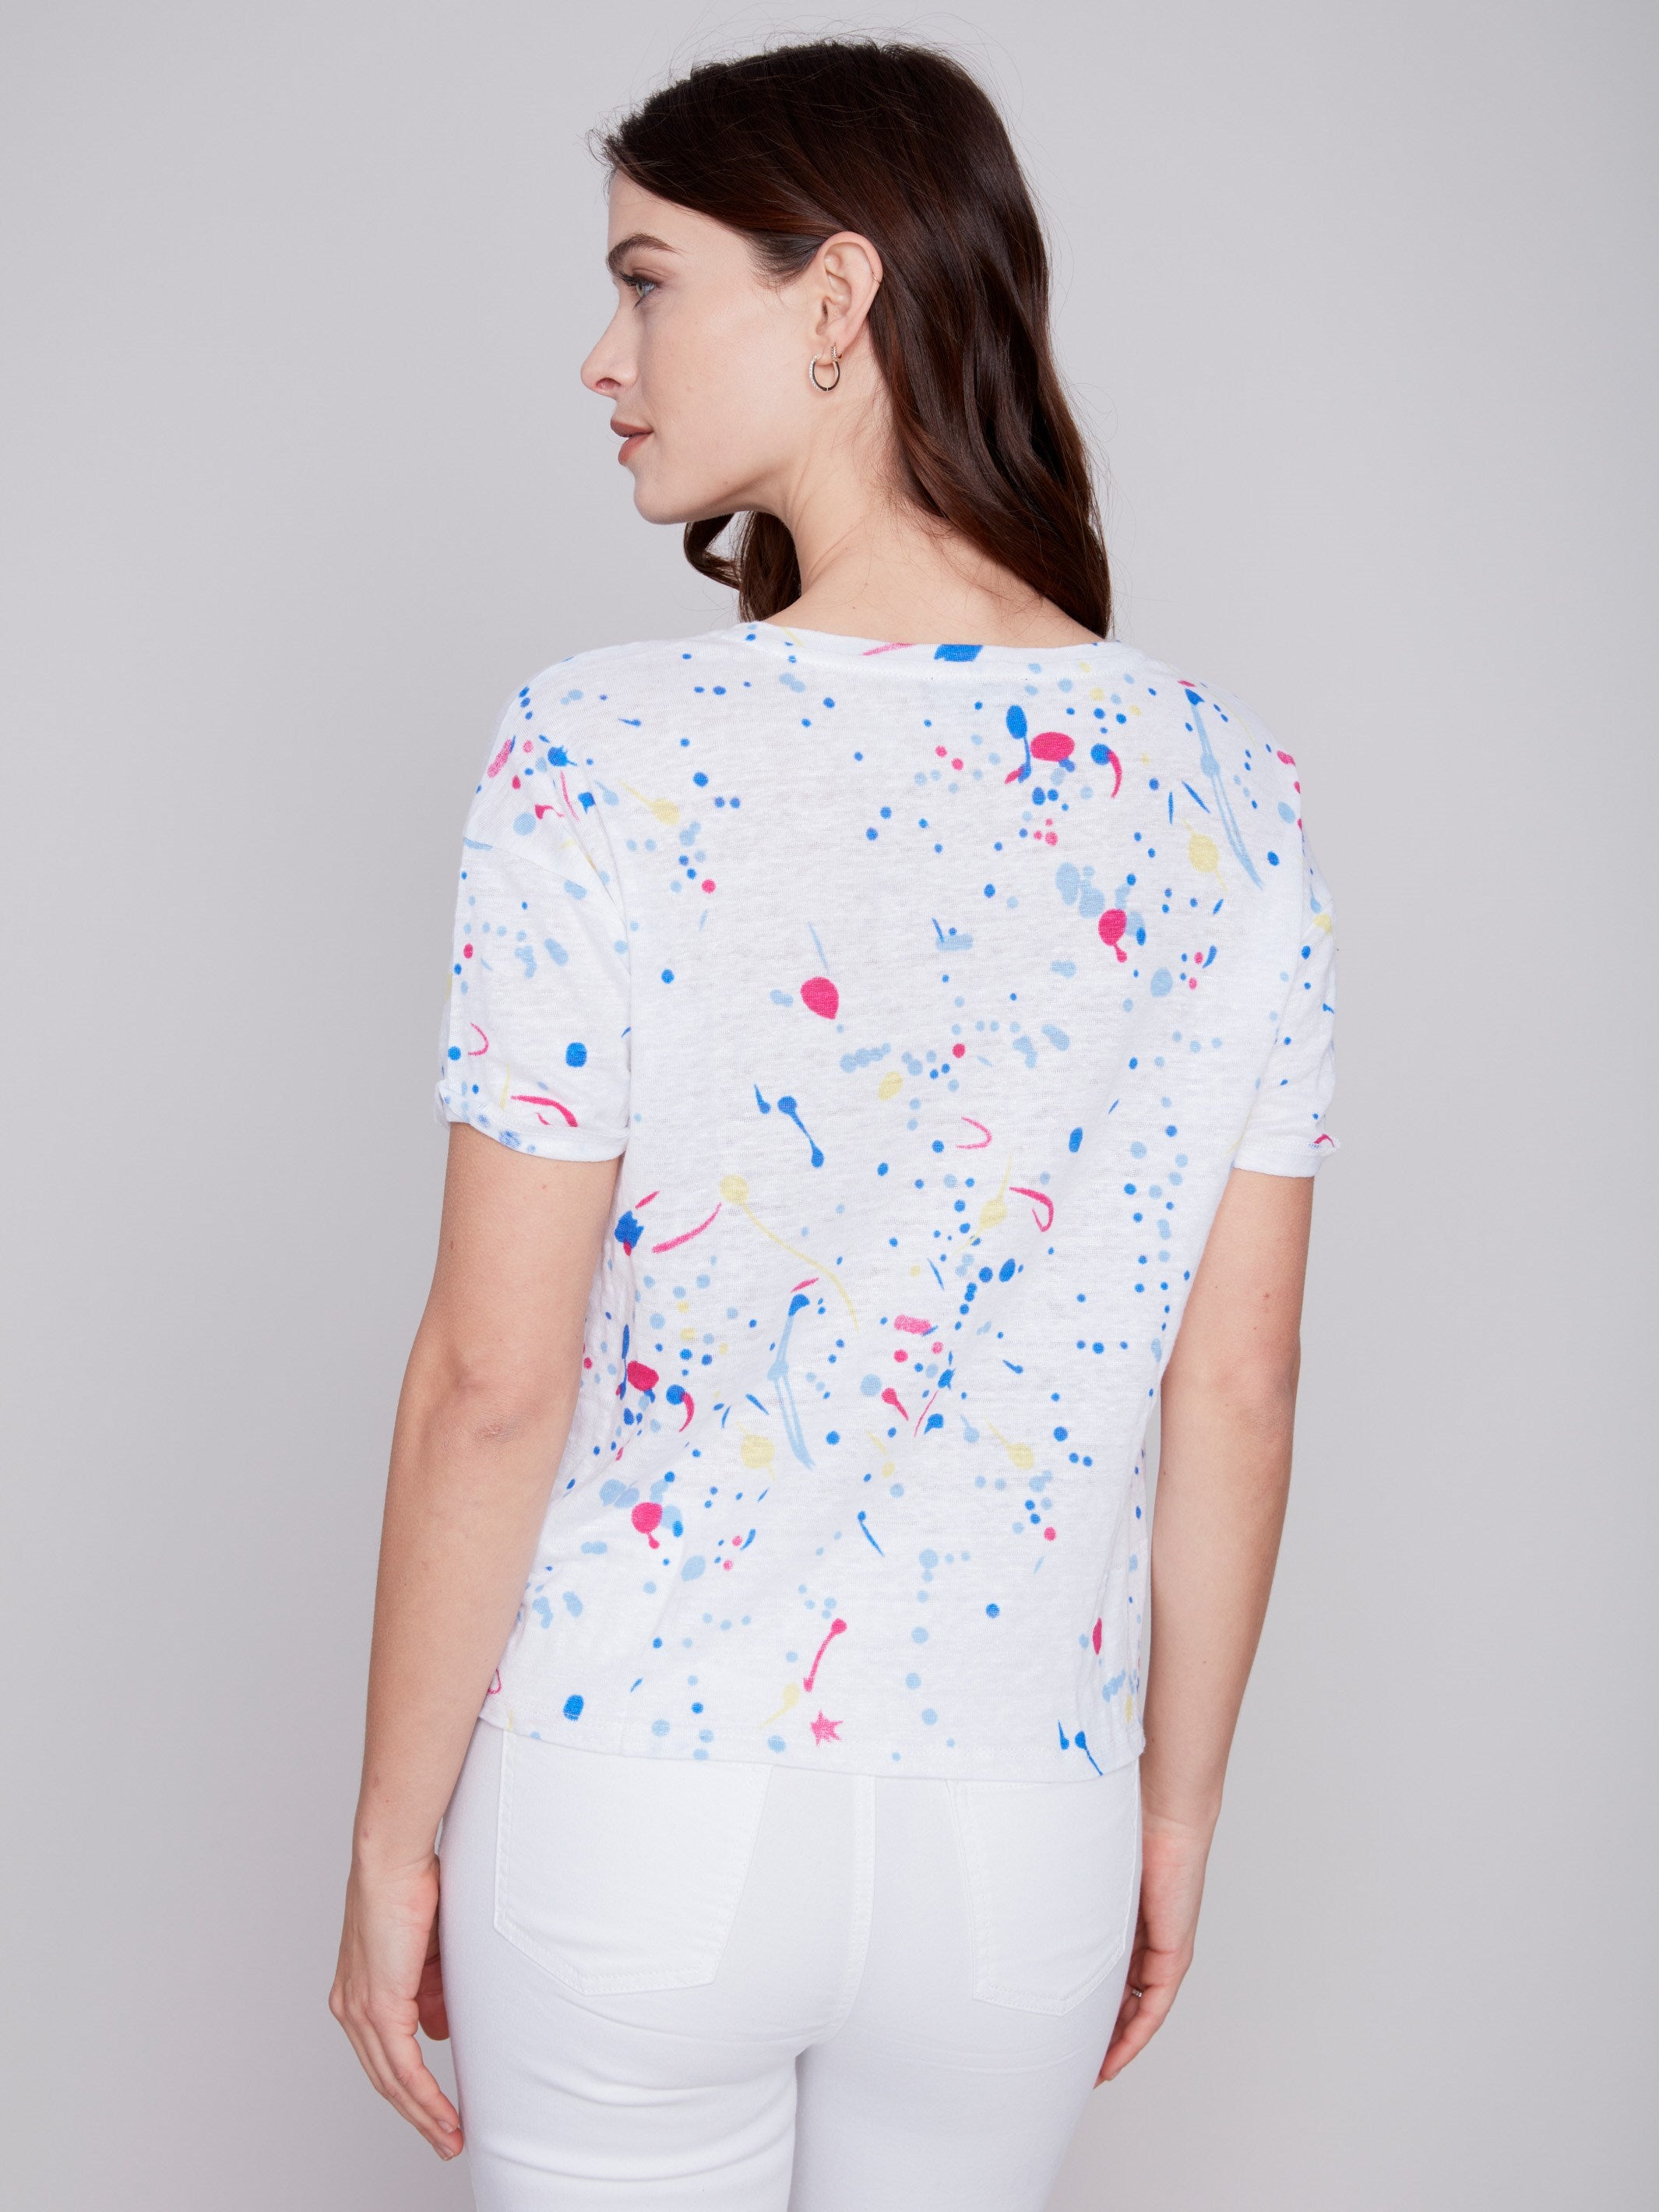 Printed Linen Top With Front Twist Knot - Splash - Charlie B Collection Canada - Image 7